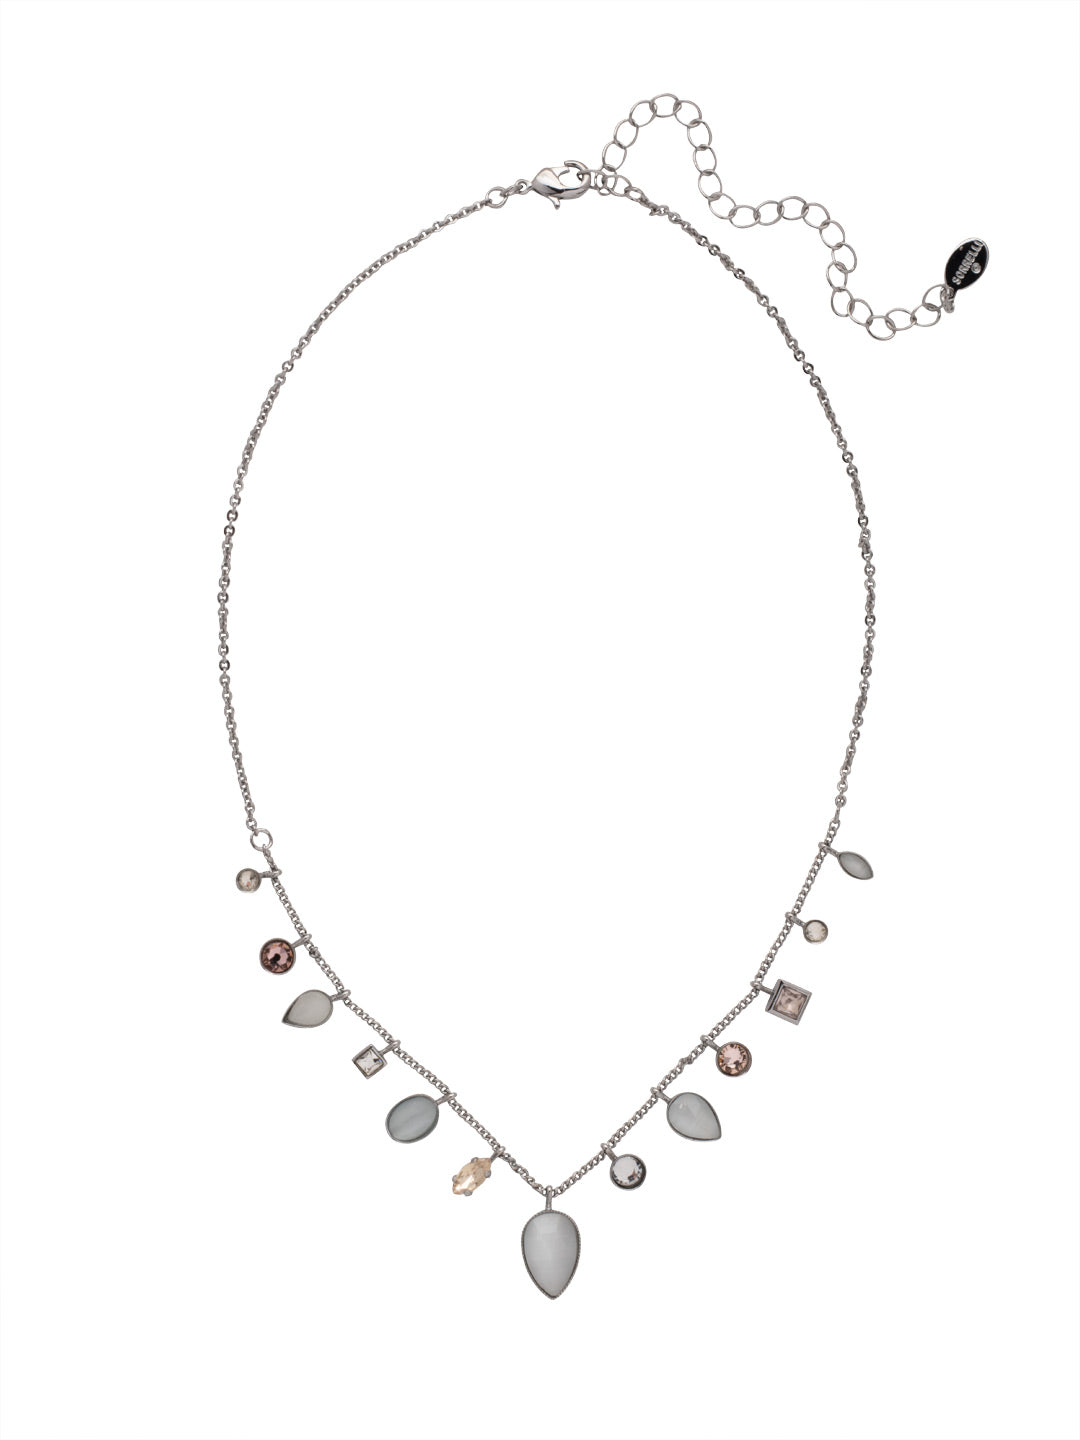 Elaina Tennis Necklace - NFC70PDSNB - <p>The Elaina Tennis Necklace features an assortment of delicate crystal and semi-precious charms on an adjustable lightweight chain, secured with a lobster claw clasp. From Sorrelli's Snow Bunny collection in our Palladium finish.</p>